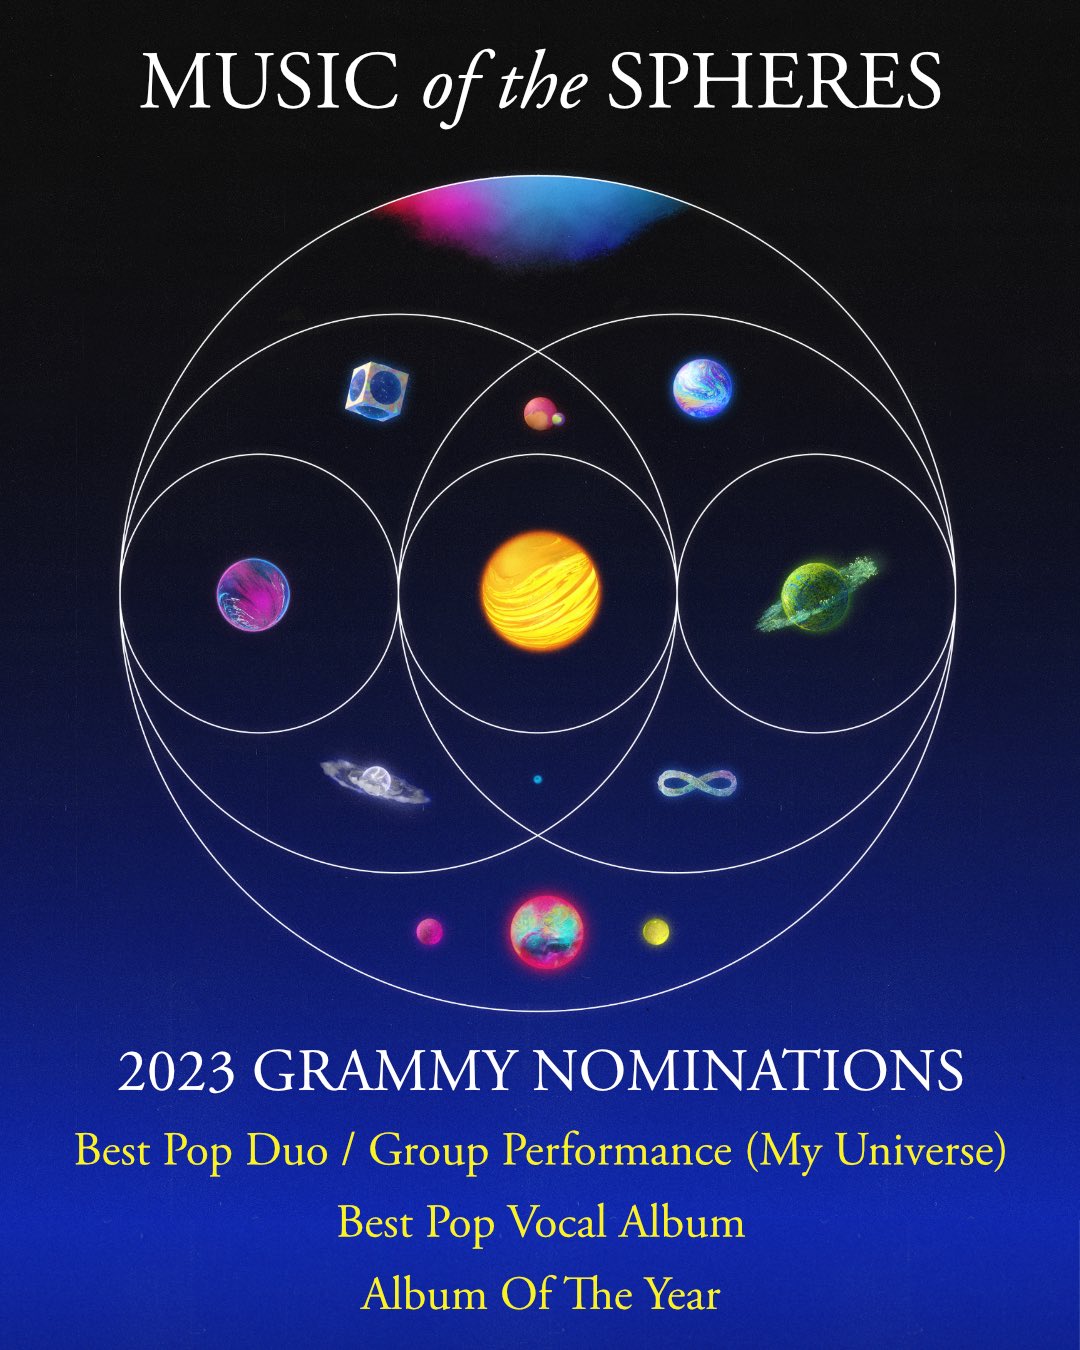 Indgang modnes Morgen Coldplay on Twitter: "Thank you @RecordingAcad for three 2023 GRAMMY  nominations for Music Of The Spheres - Best Pop Duo / Group Performance (My  Universe with @BTS_twt) - Best Pop Vocal Album -